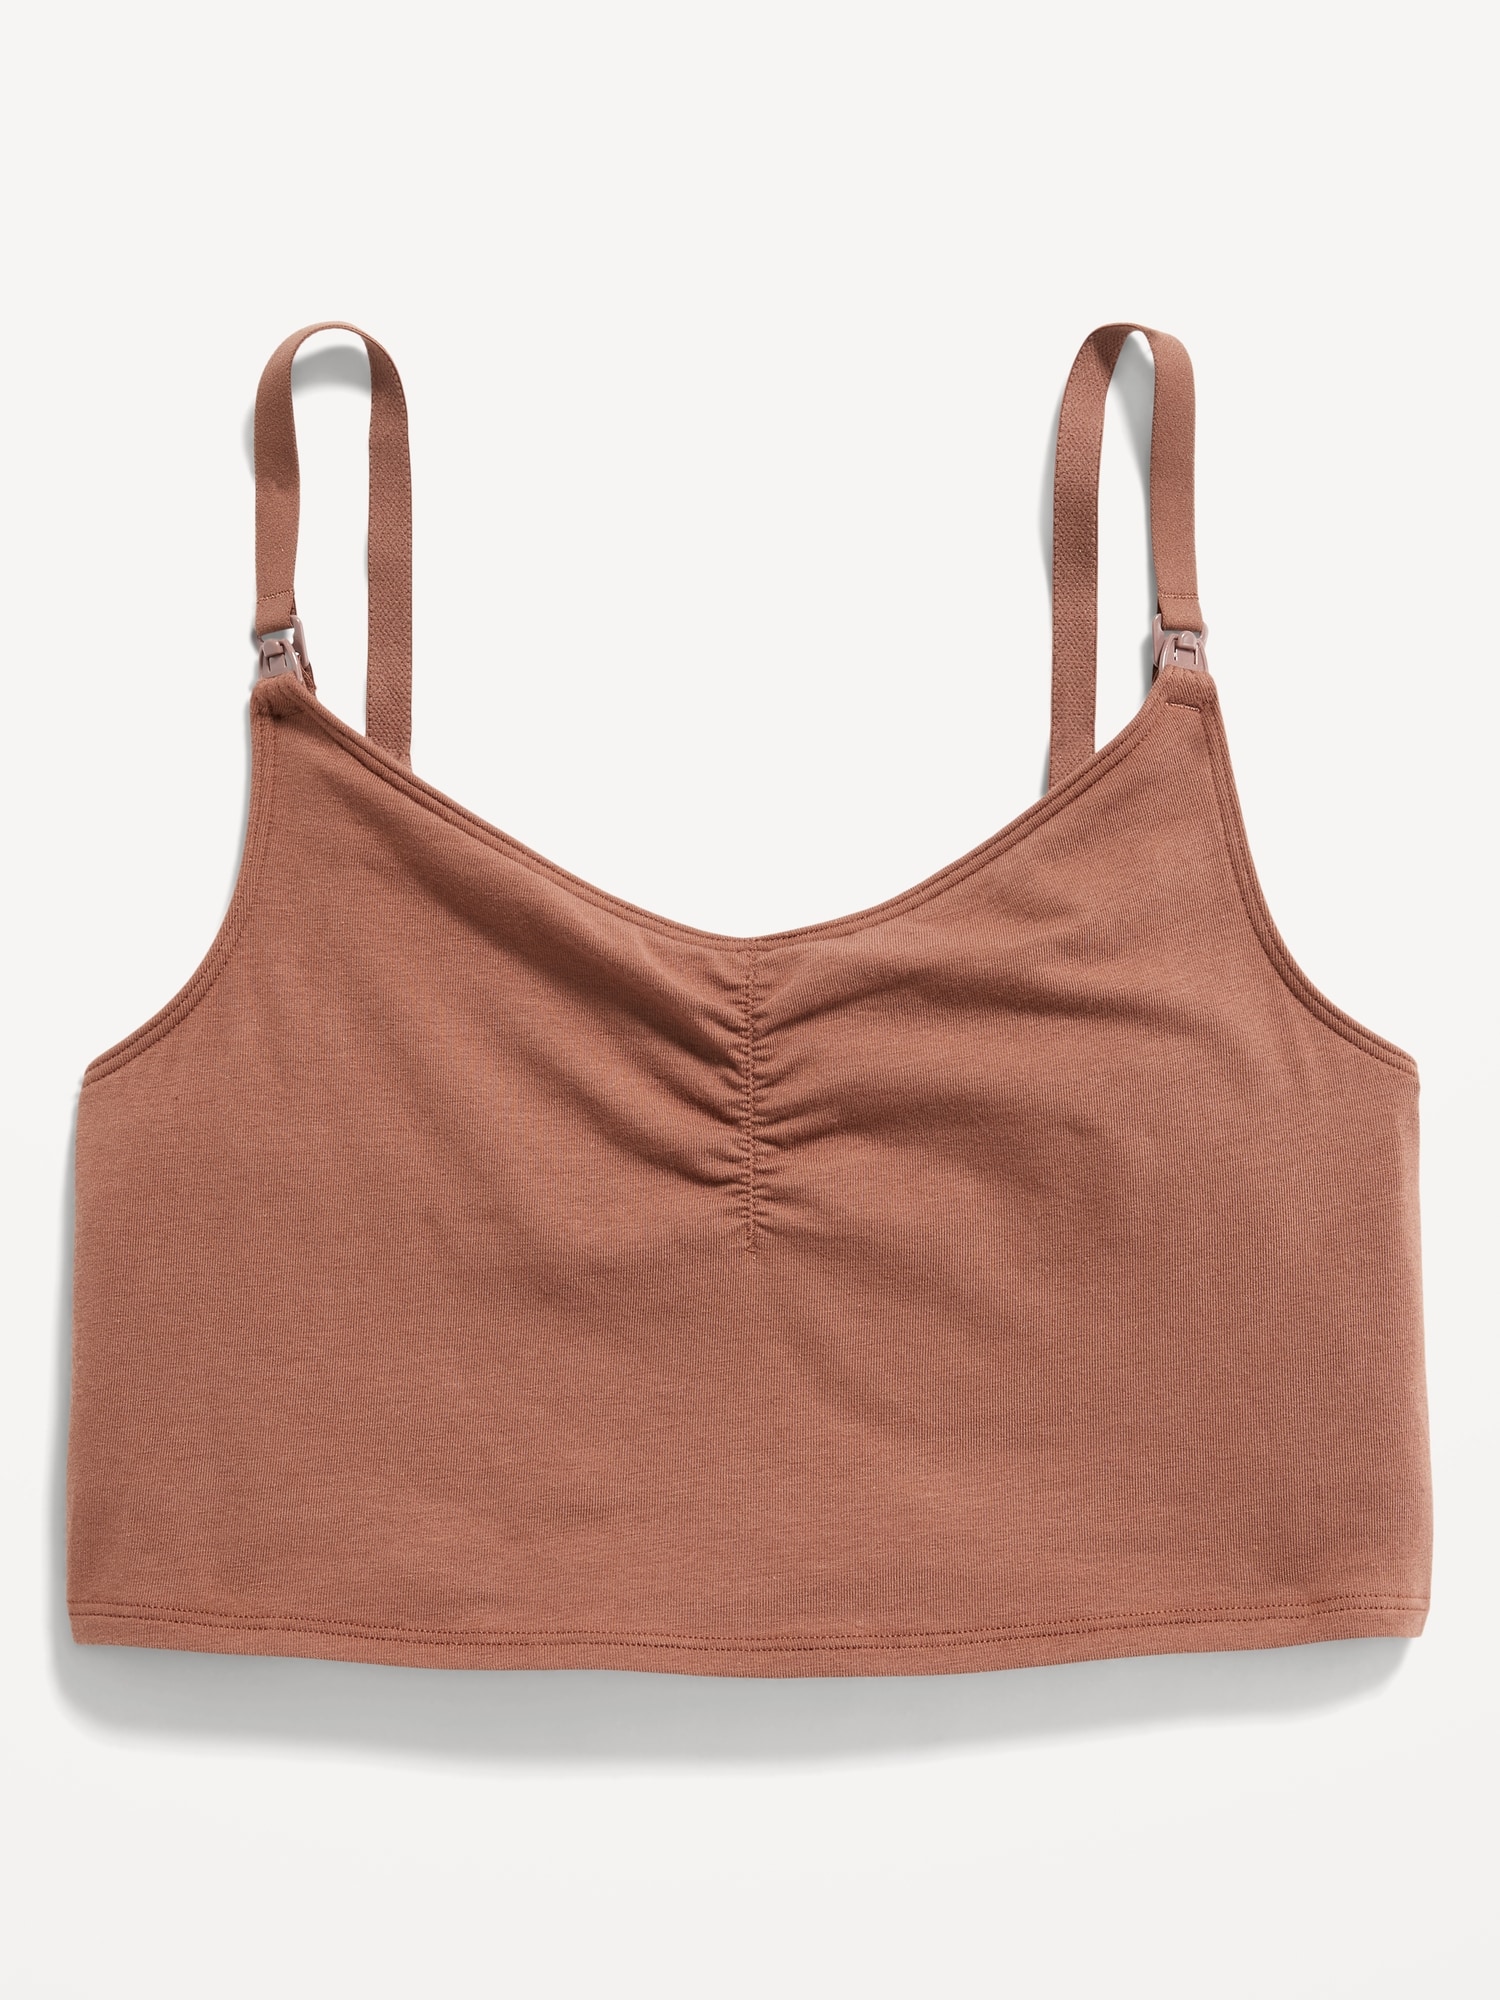 2 Pack Maternity Wirefree Crossover Crop Top - Kmart